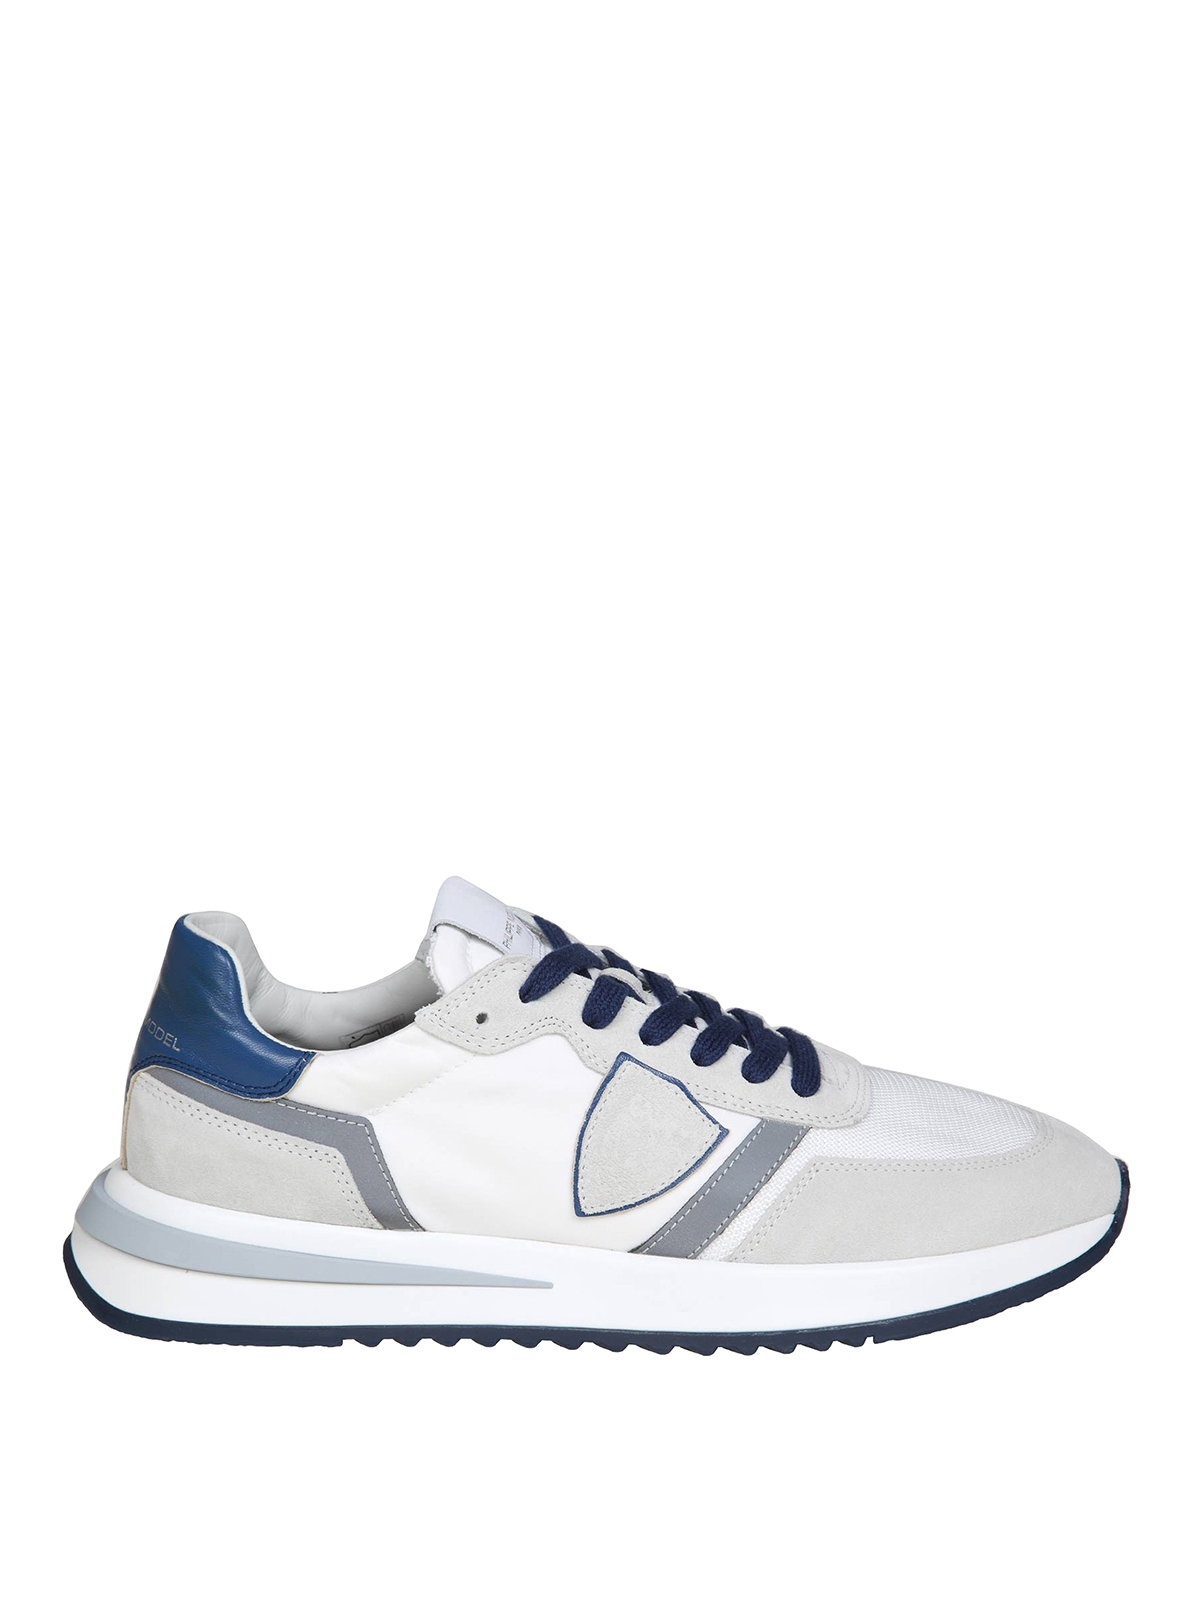 Trainers Philippe Model - Philippe model tropez in white and blue suede ...